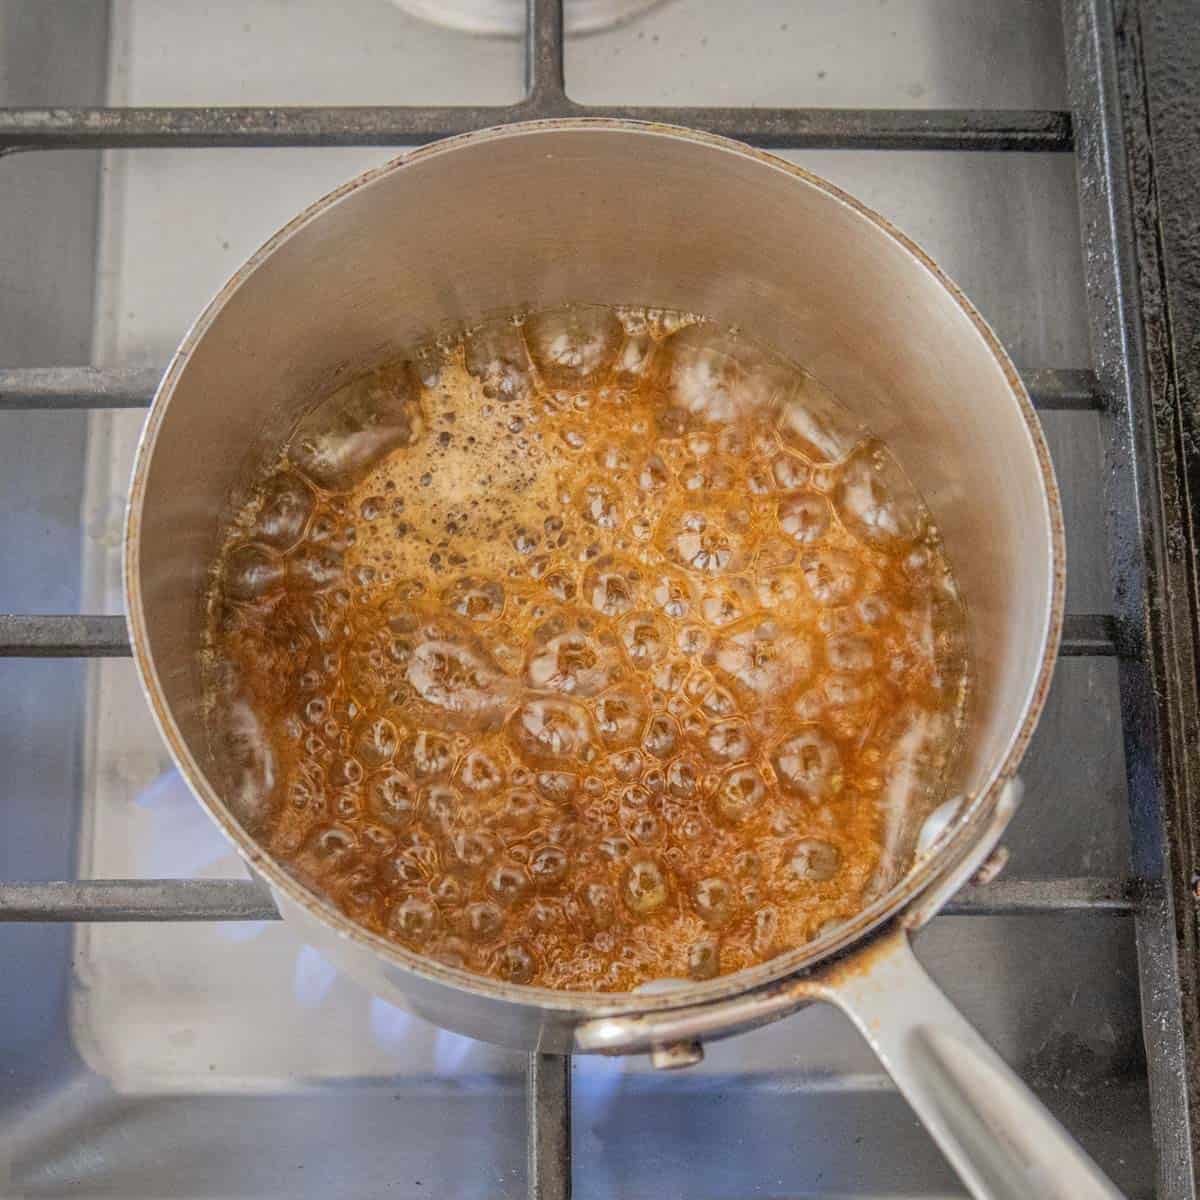 Boiling maple syrup in a pan on the stove.